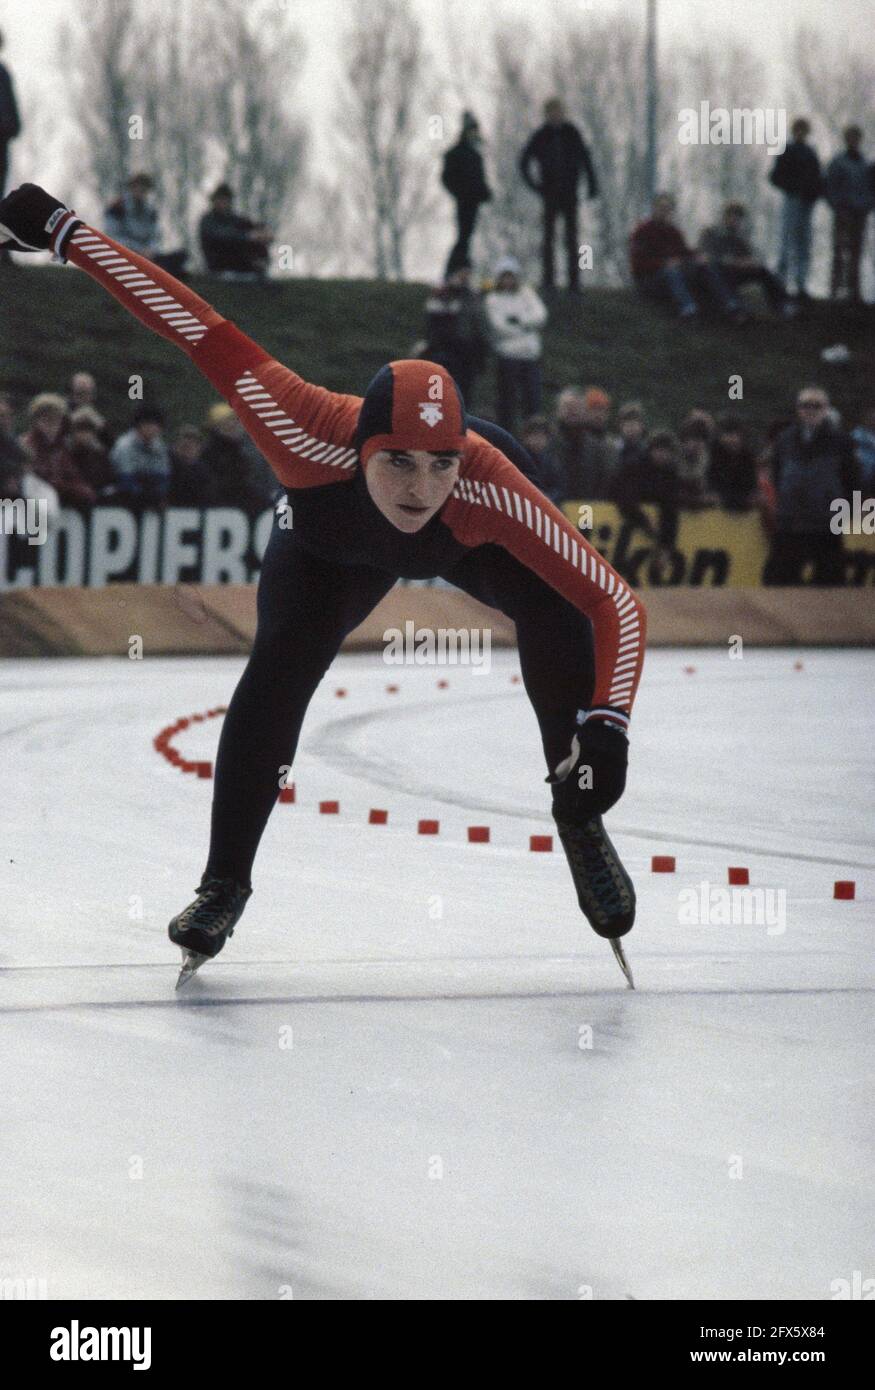 World speed skating championships sprint in Alkmaar. Yvonne van Gennip at  the start of the 500 meters., February 6, 1982, skating, sport, The  Netherlands, 20th century press agency photo, news to remember,